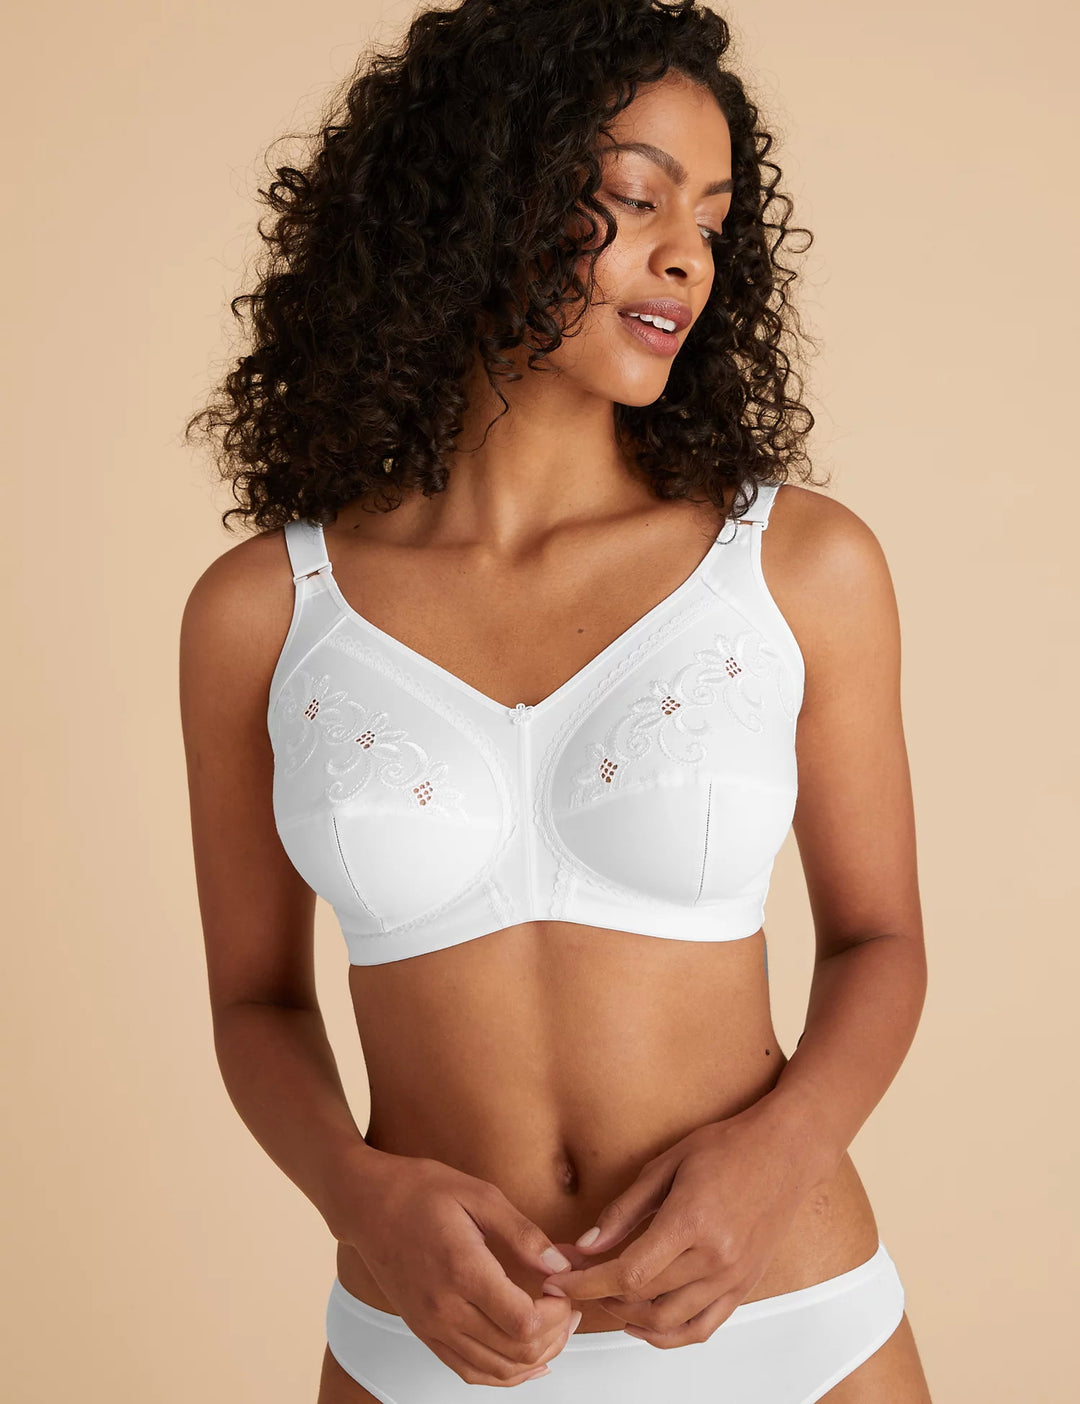 MARKS SPENCER M&S WHITE COTTON NON WIRE FULL CUP SUPPORT BRA SIZE